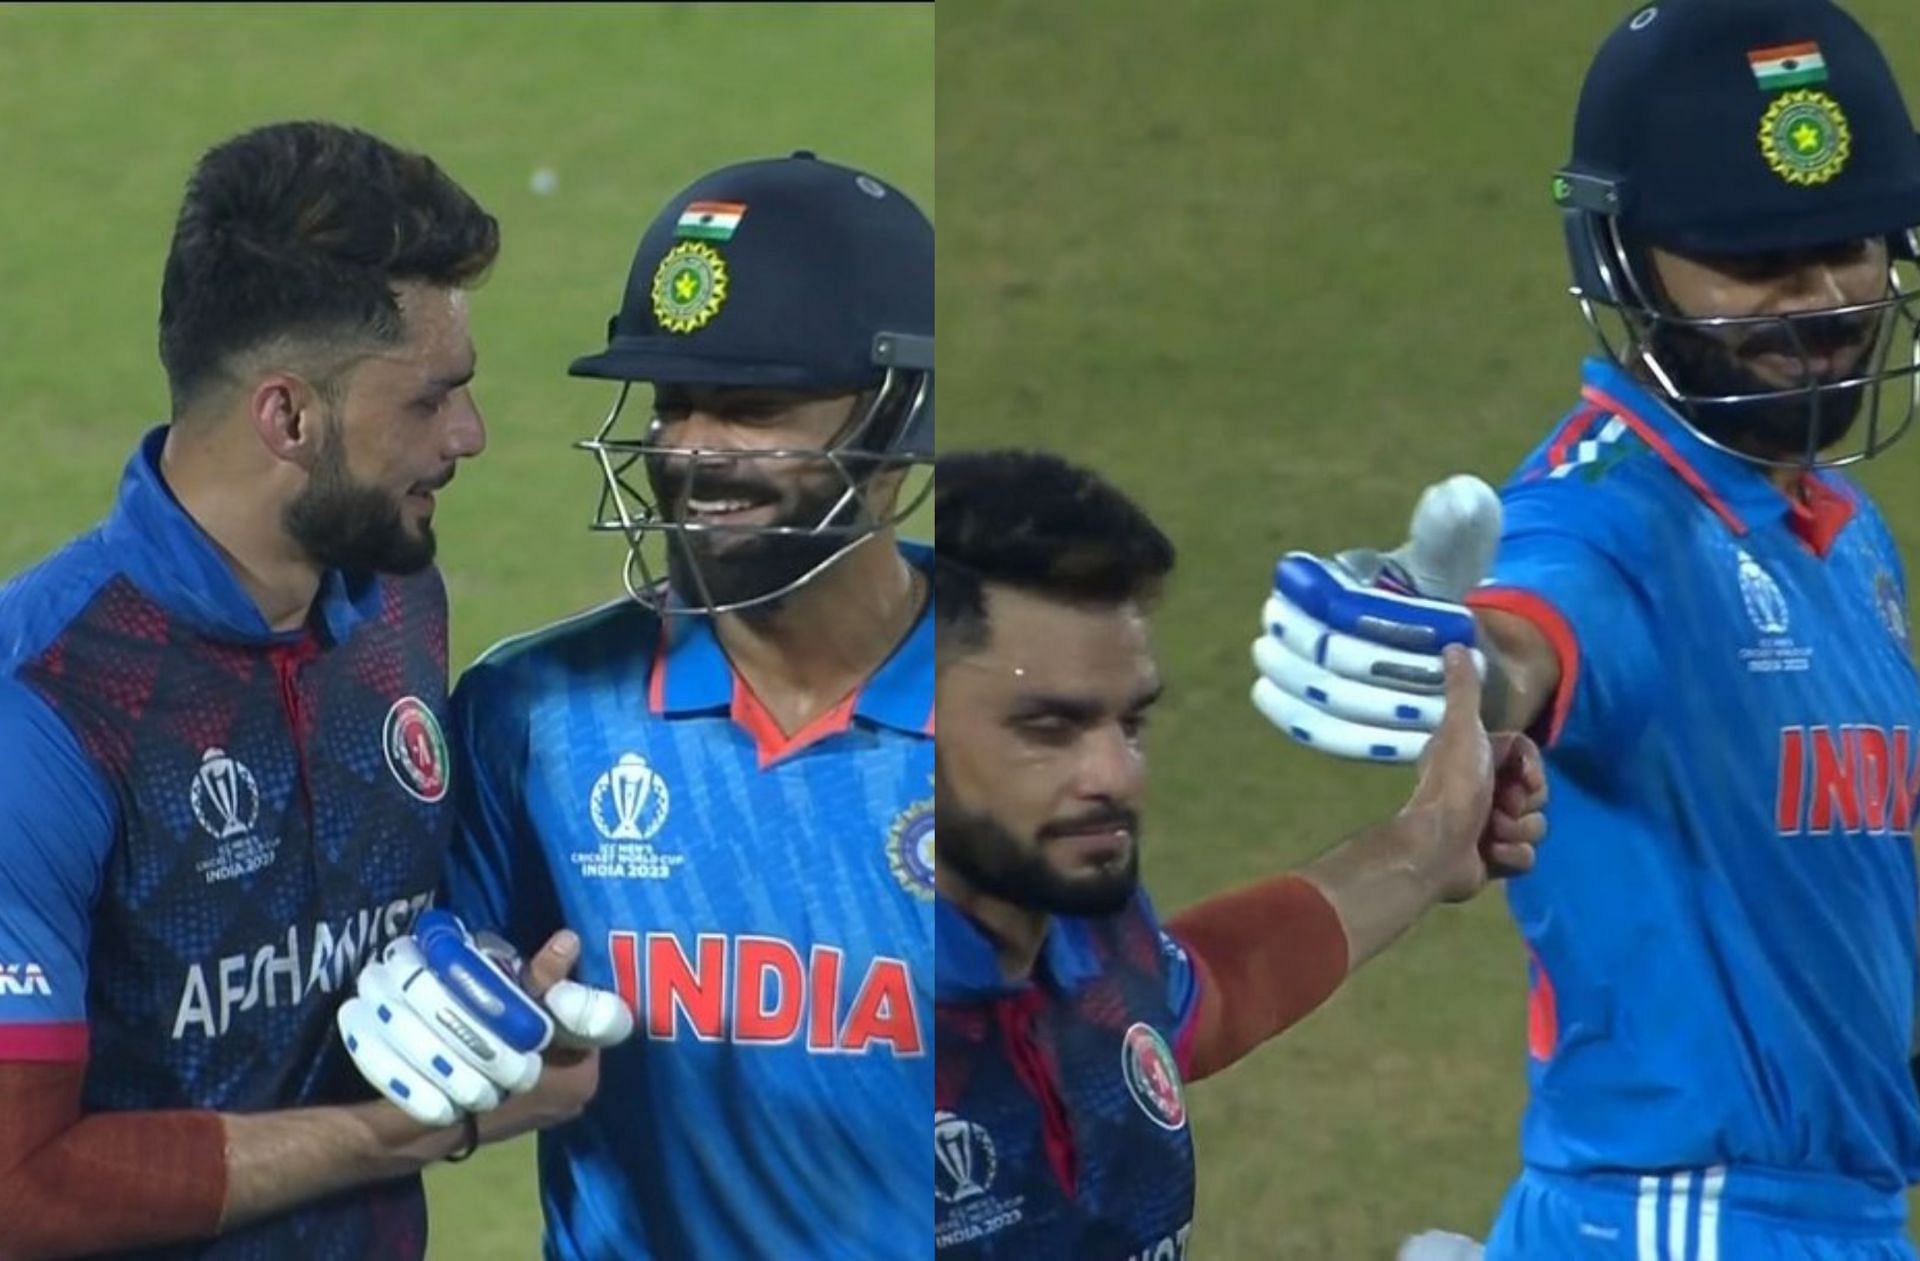 [Watch] Virat Kohli & Naveen-ul-Haq embrace each other as fans go crazy during IND vs AFG 2023 World Cup match